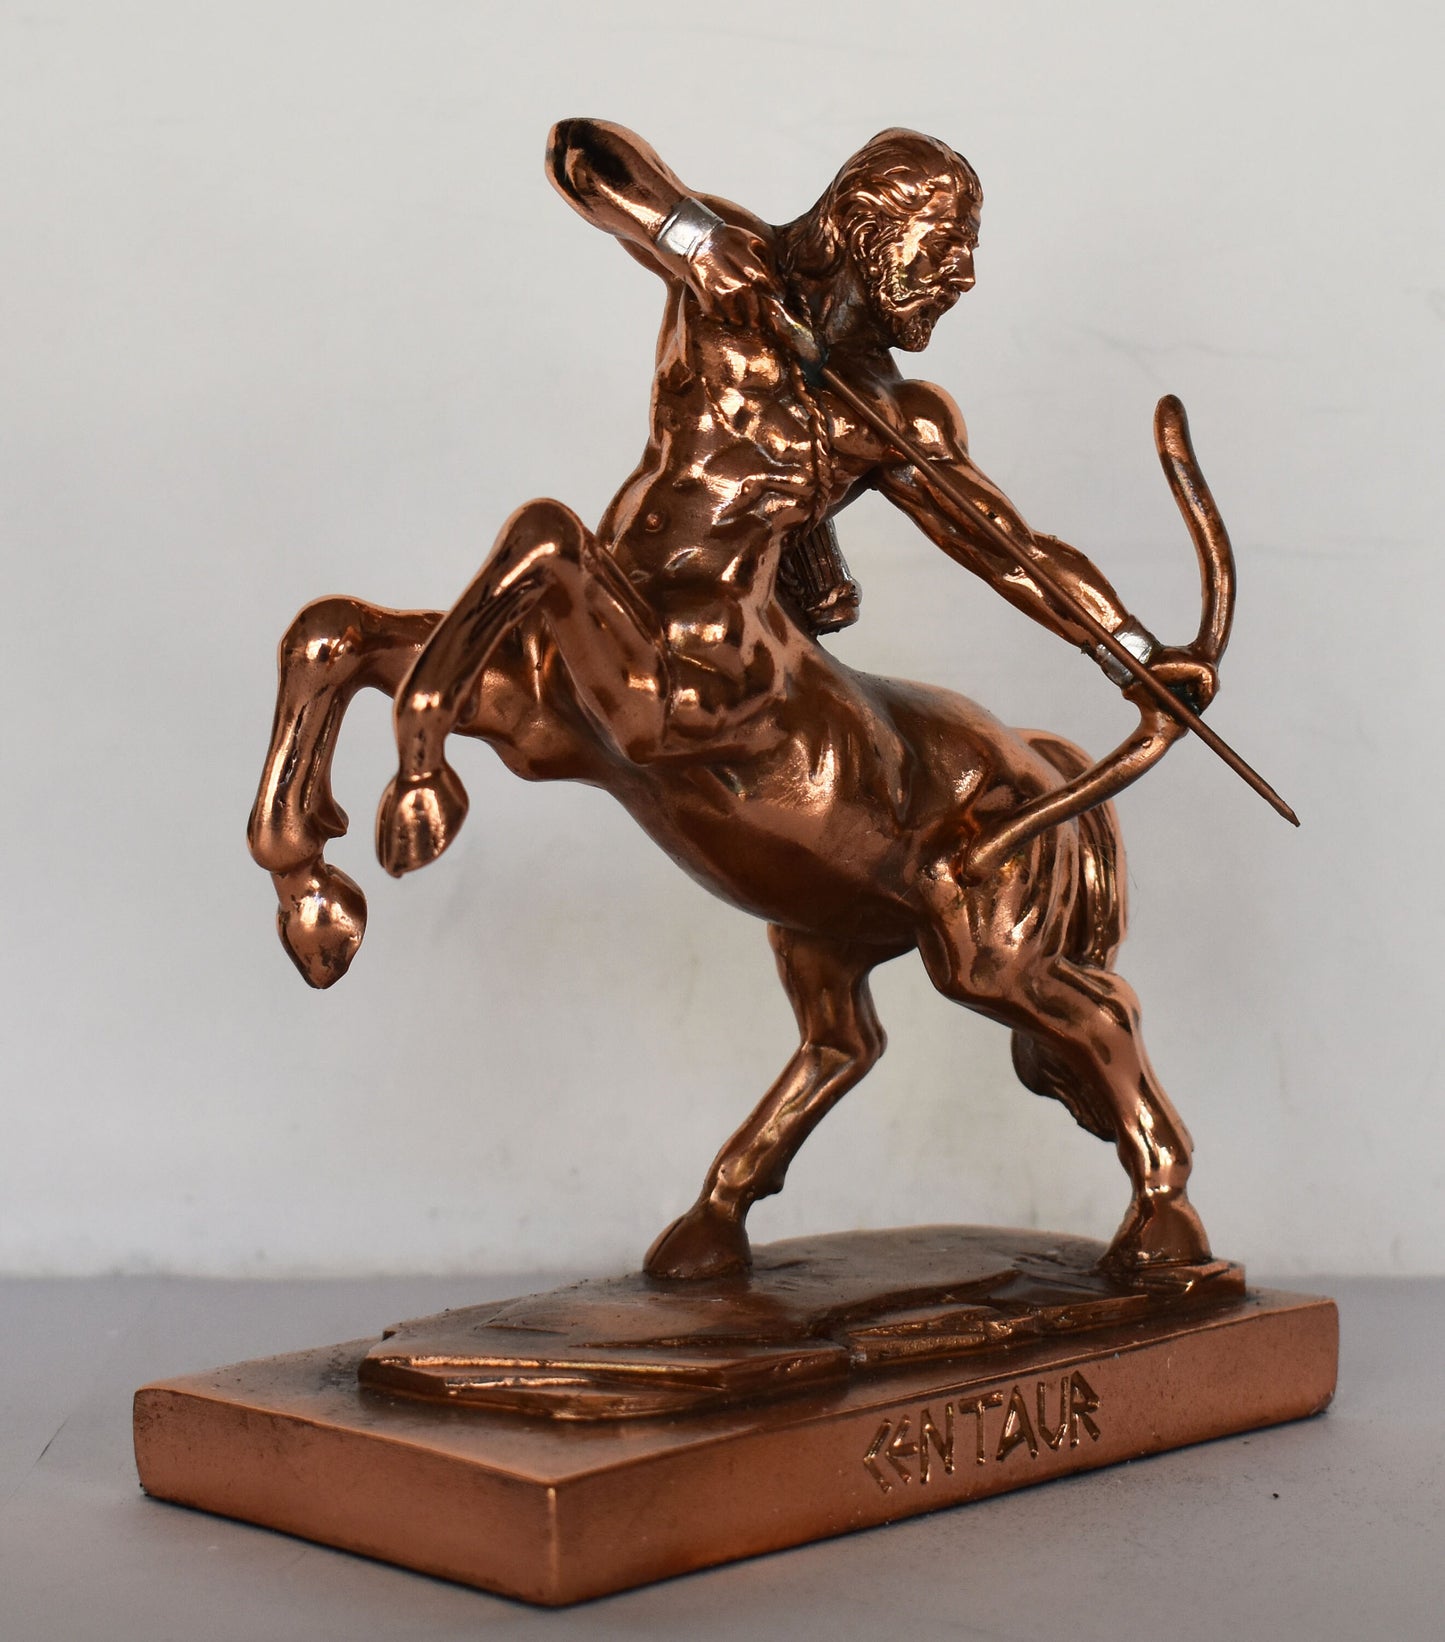 Centaur - Hybrid Creature -  Half-Man, Half-Horse - Life in Tribes - Homes in Caves - Hunting Wild Animals - Copper Plated Alabaster